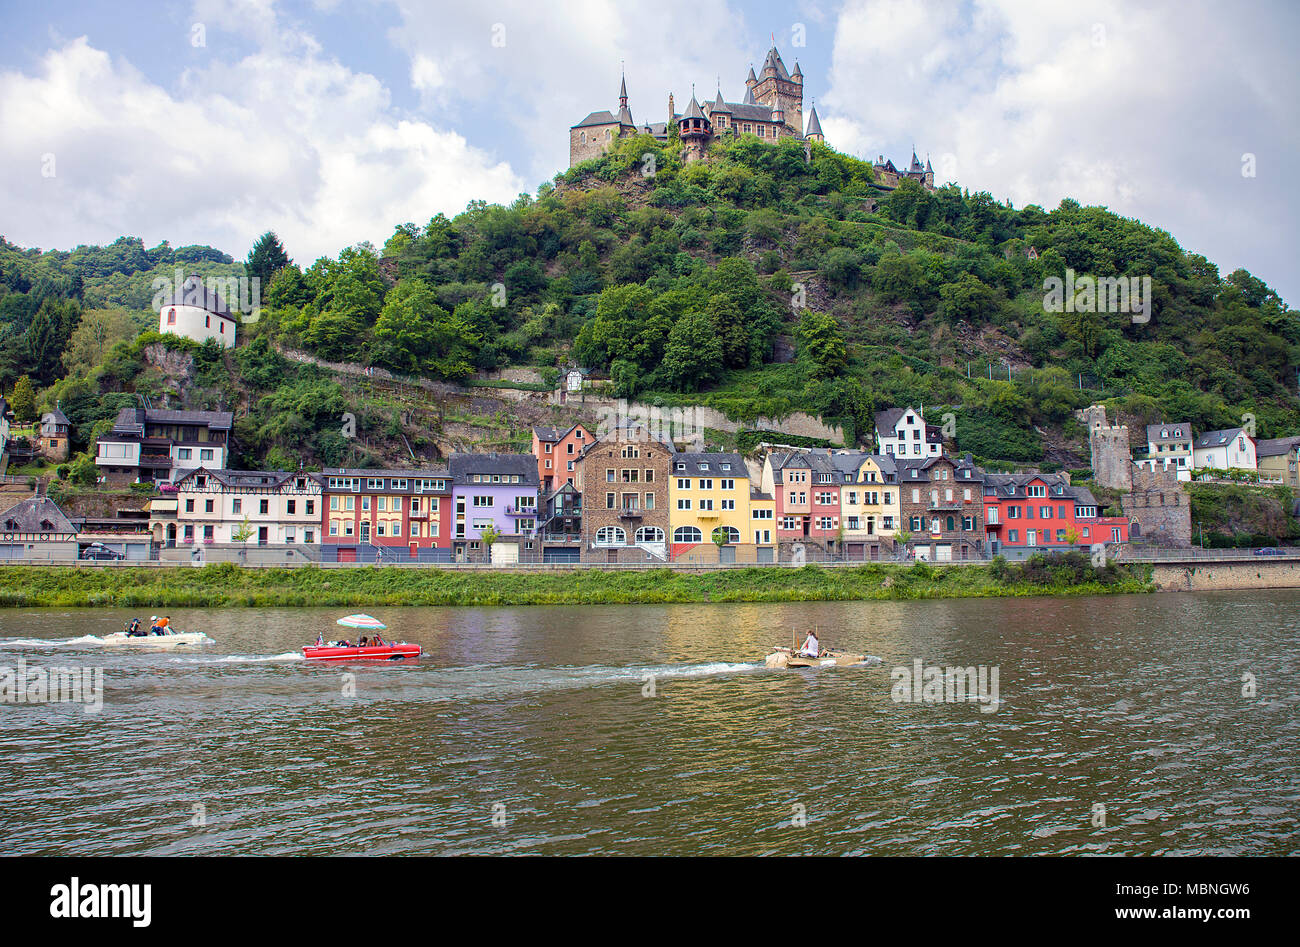 Amphibious vehicle driving on Moselle river, passing the imperial castle, Cochem, Rhineland-Palatinate, Germany Stock Photo